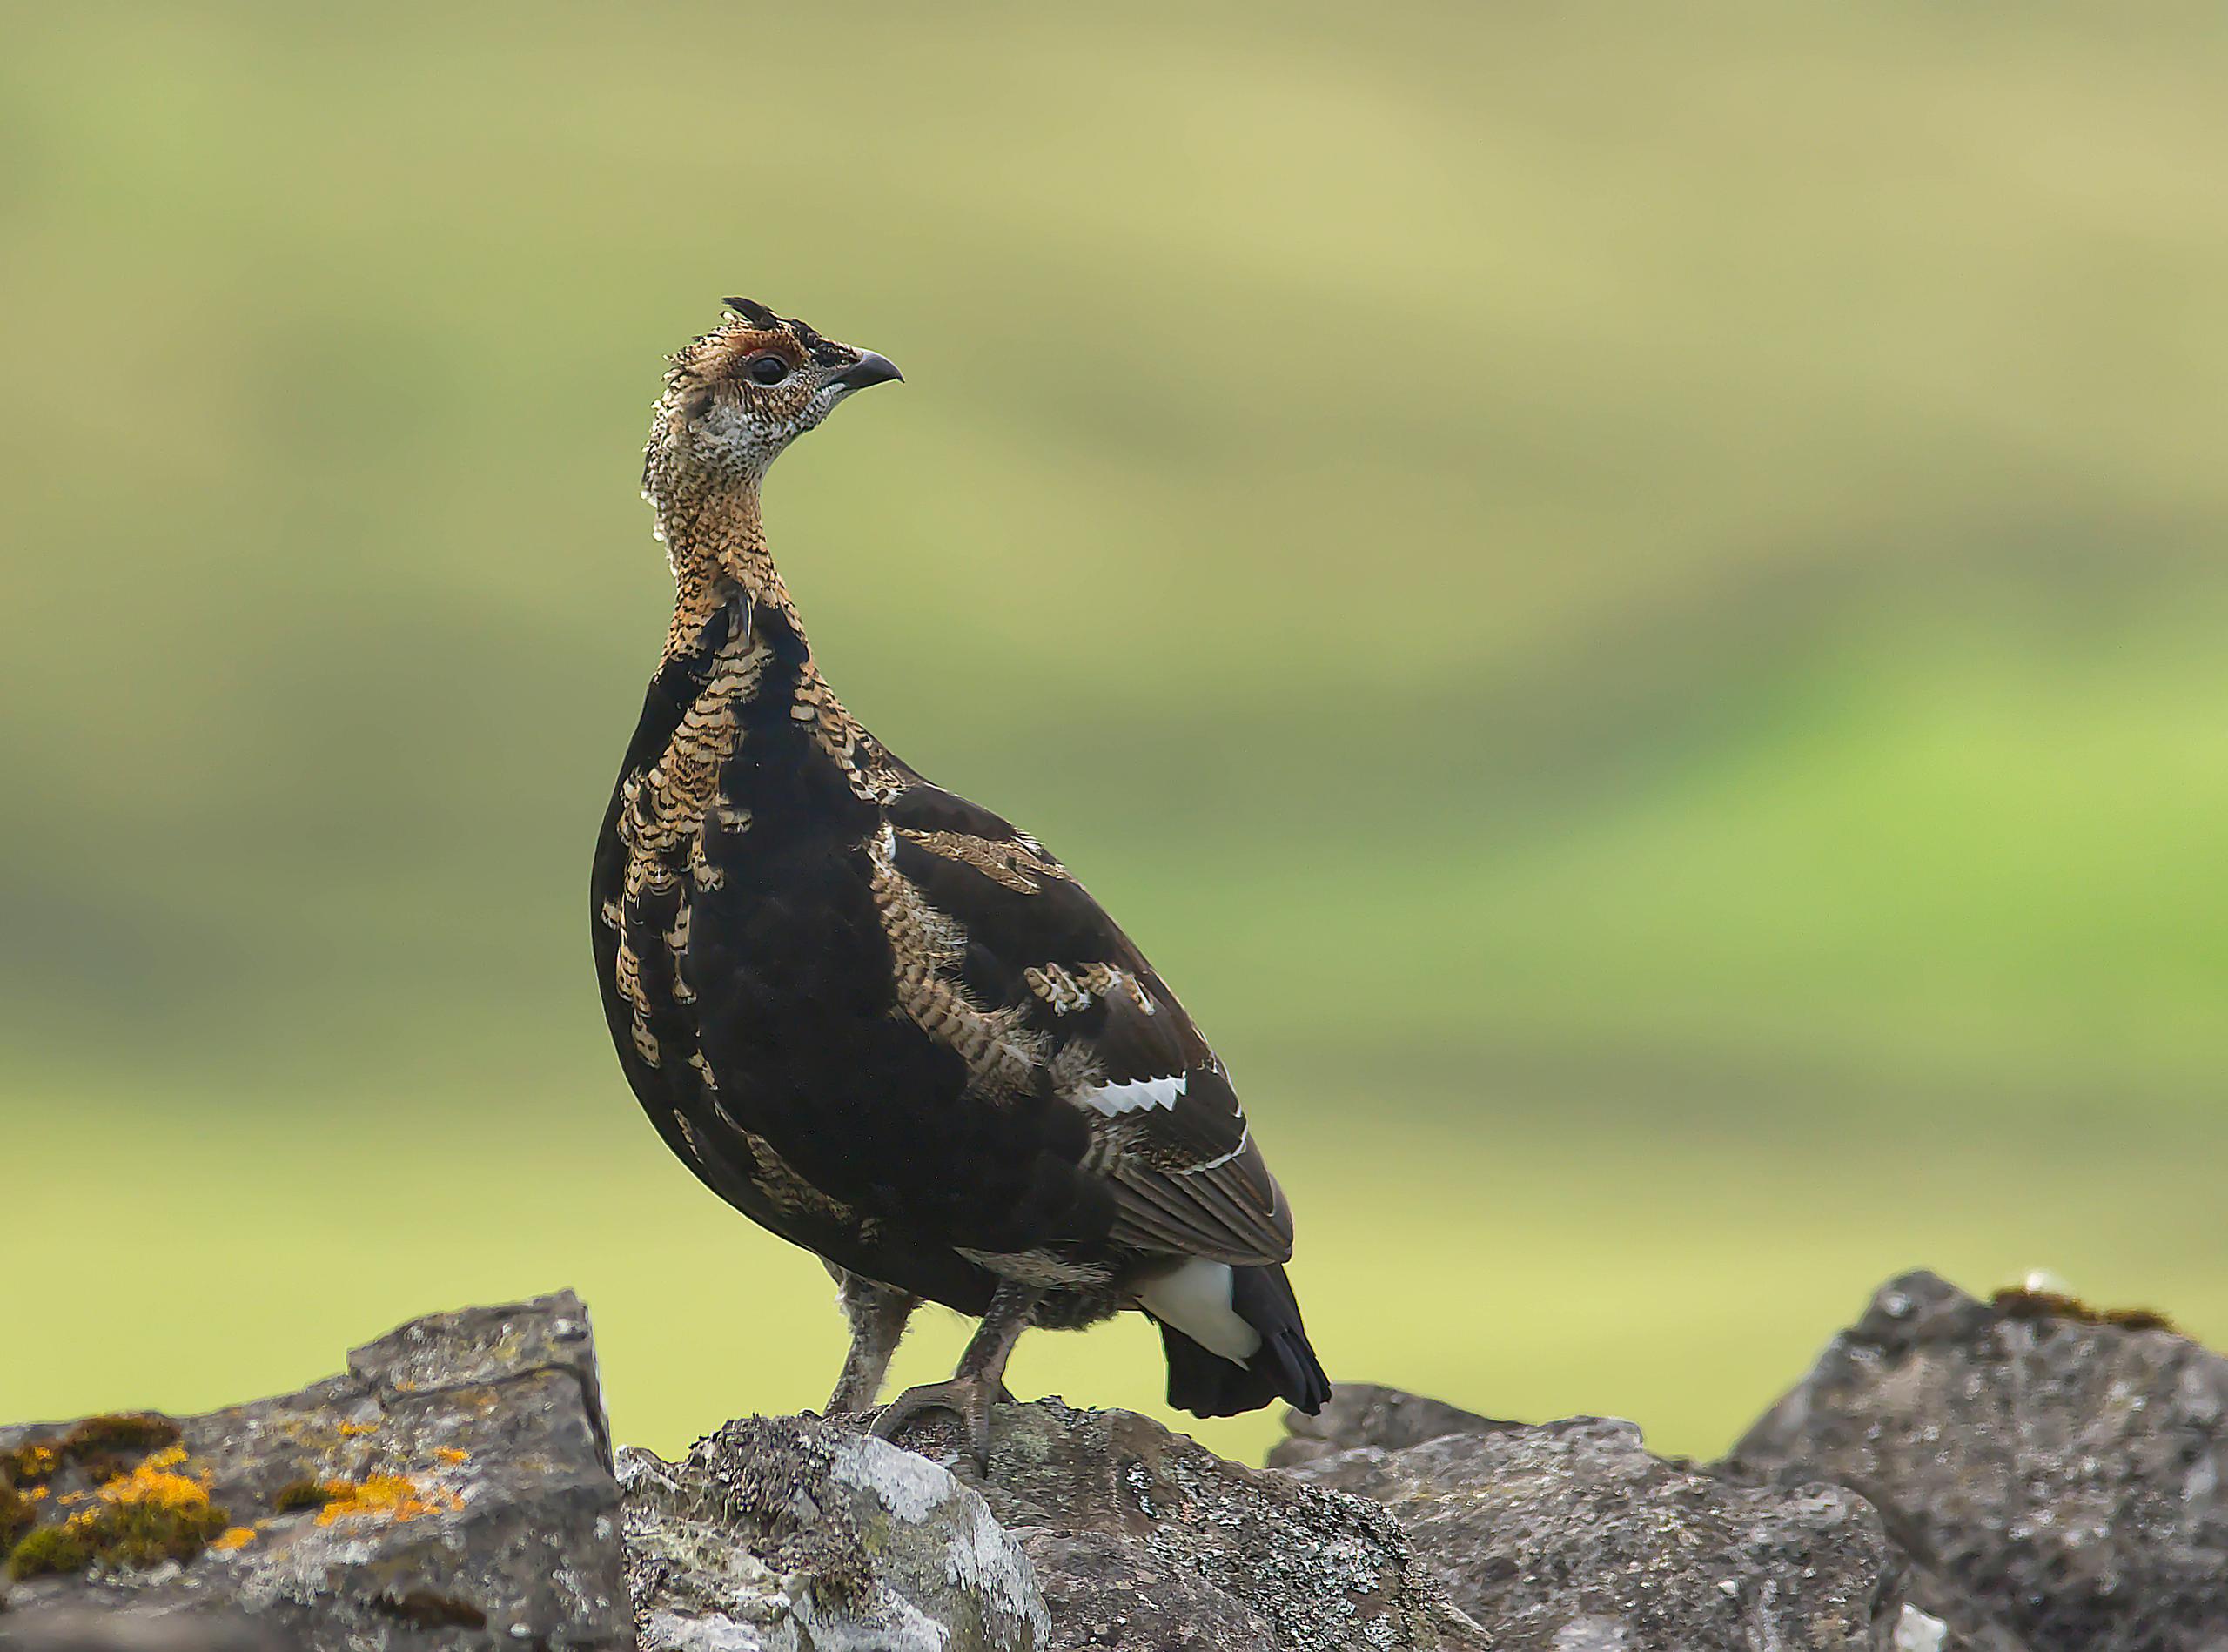 A Juvenile black grouse with his head cocked in interest as he is perched on a wall in Northumberland countryside. Set against the green background of the field behind.